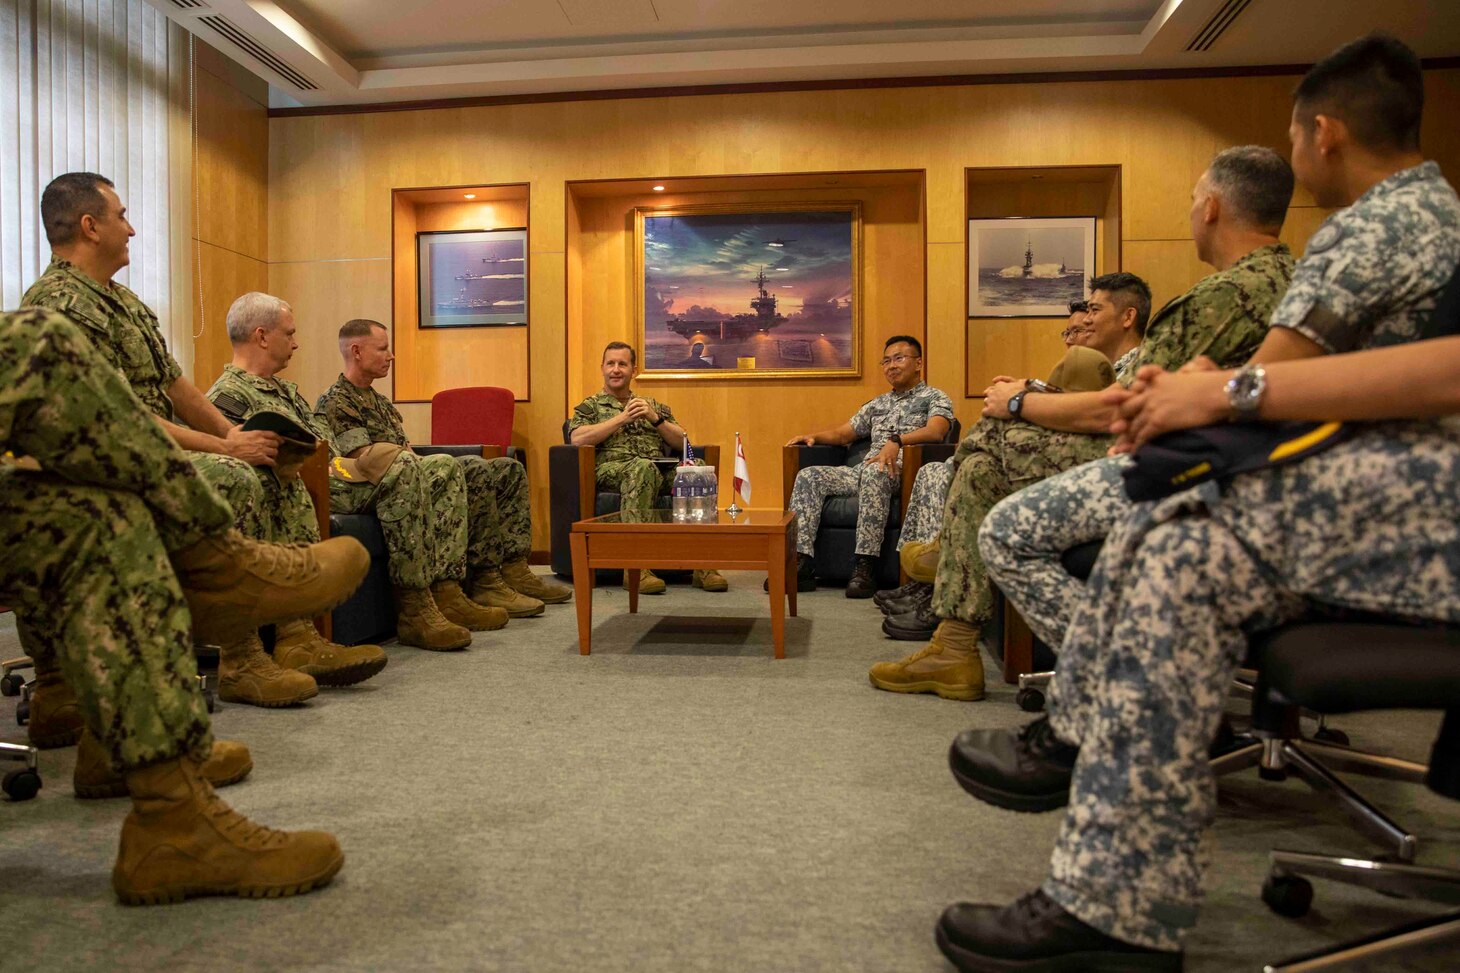 SINGAPORE (Jan. 9, 2023) Rear Adm. Mark Melson, Commander, Logistics Group Western Pacific/Task Force 73, meets with Rear Adm. Sean Wat, Fleet Commander, Republic of Singapore Navy (RSN), prior to the opening ceremony of Cooperation Afloat Readiness and Training (CARAT)/Marine Exercise (MAREX) Singapore 2022, Jan. 9, 2023. CARAT Singapore is a bilateral exercise between Singapore and the United States designed to promote regional security cooperation, maintain and strengthen maritime partnerships, and enhance maritime cooperation. In its 28th, the CARAT series is comprised of multinational exercises, designed to enhance U.S. and partner forces’ abilities to operate together in response to traditional and non-traditional maritime security challenges in the Indo-Pacific region. The Makin Island Amphibious Ready Group, comprised of Makin Island, Murtha and amphibious transport dock USS Anchorage (LPD 23), is operating in the U.S. 7th Fleet area of operations with the embarked 13th Marine Expeditionary Unit to enhance interoperability with Allies and partners and serve as a ready-response force to defend peace and maintain stability in the Indo-Pacific region. (U.S. Navy photo by Mass Communication Specialist 3rd Class Kendra Helmbrecht)